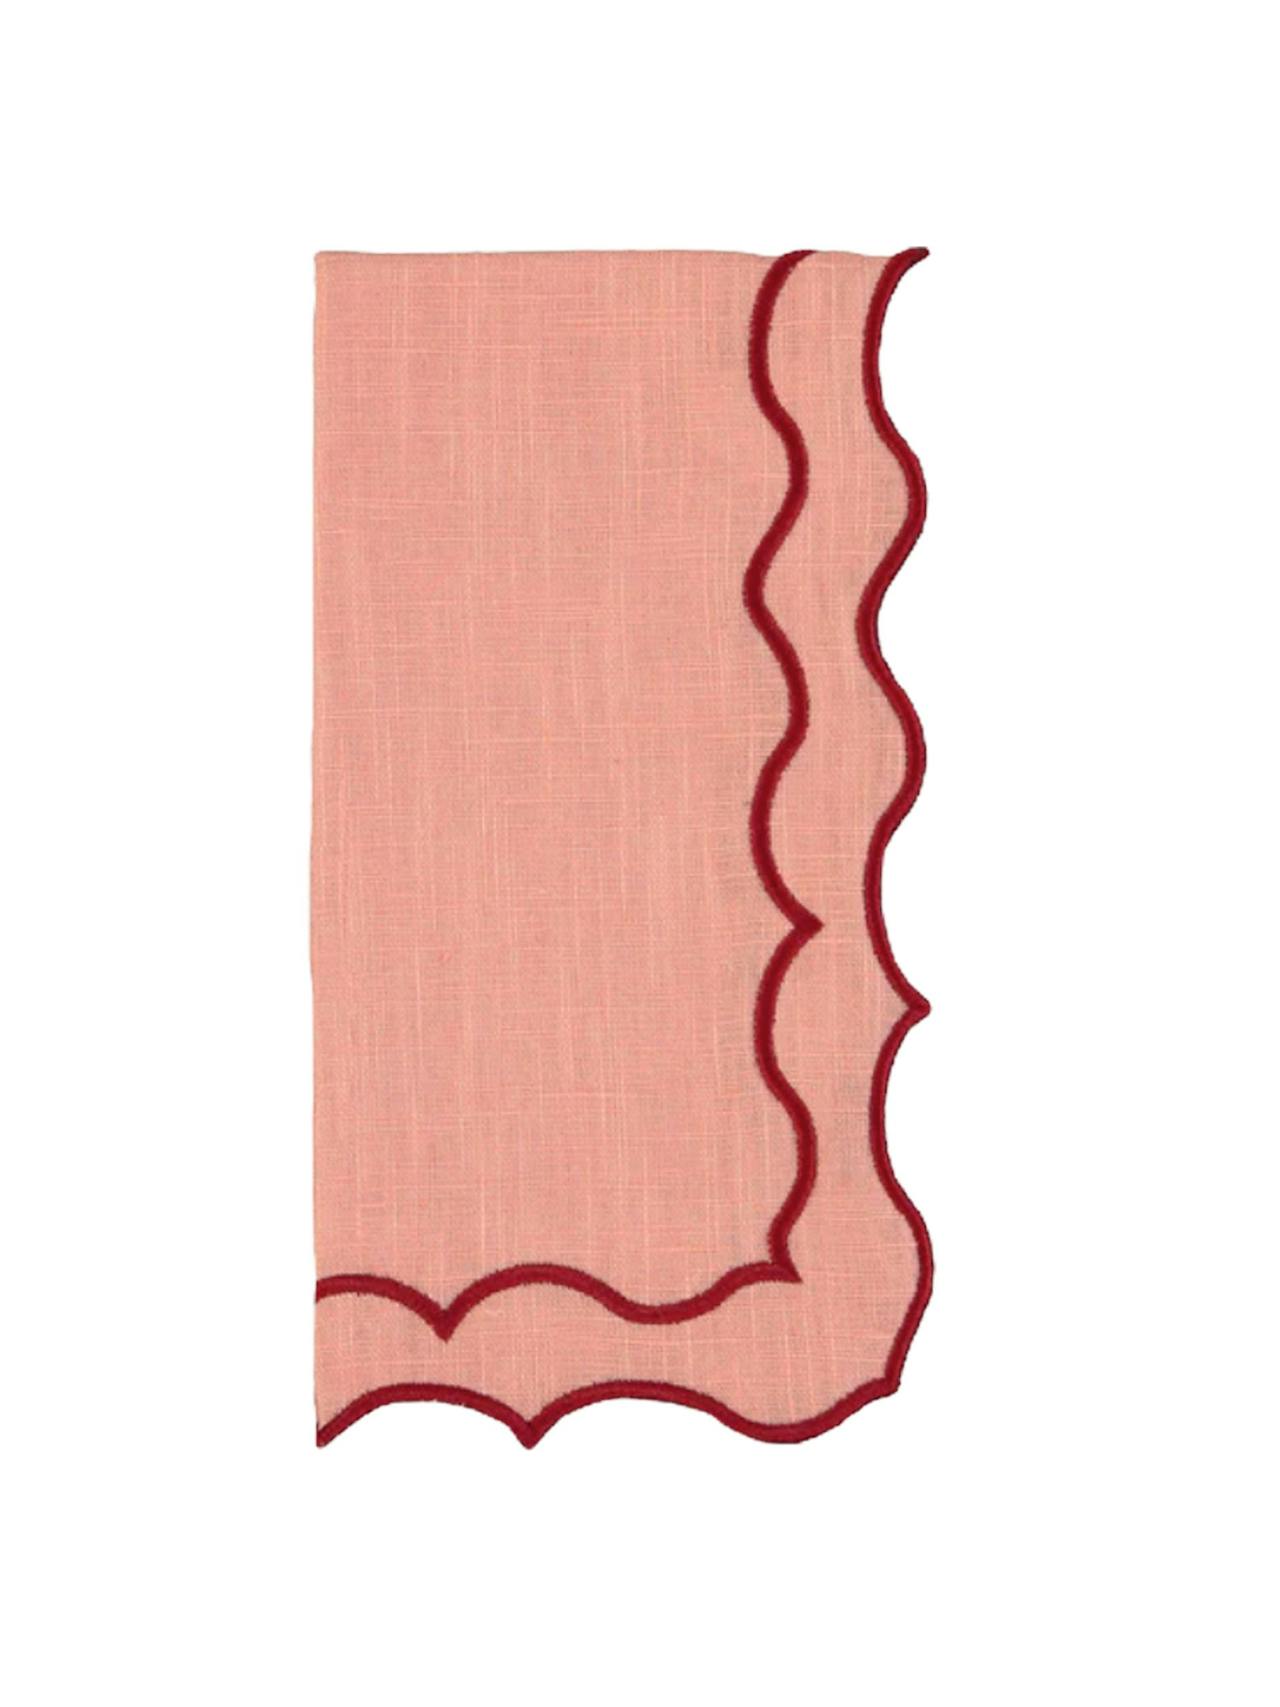 Peach and red napkin